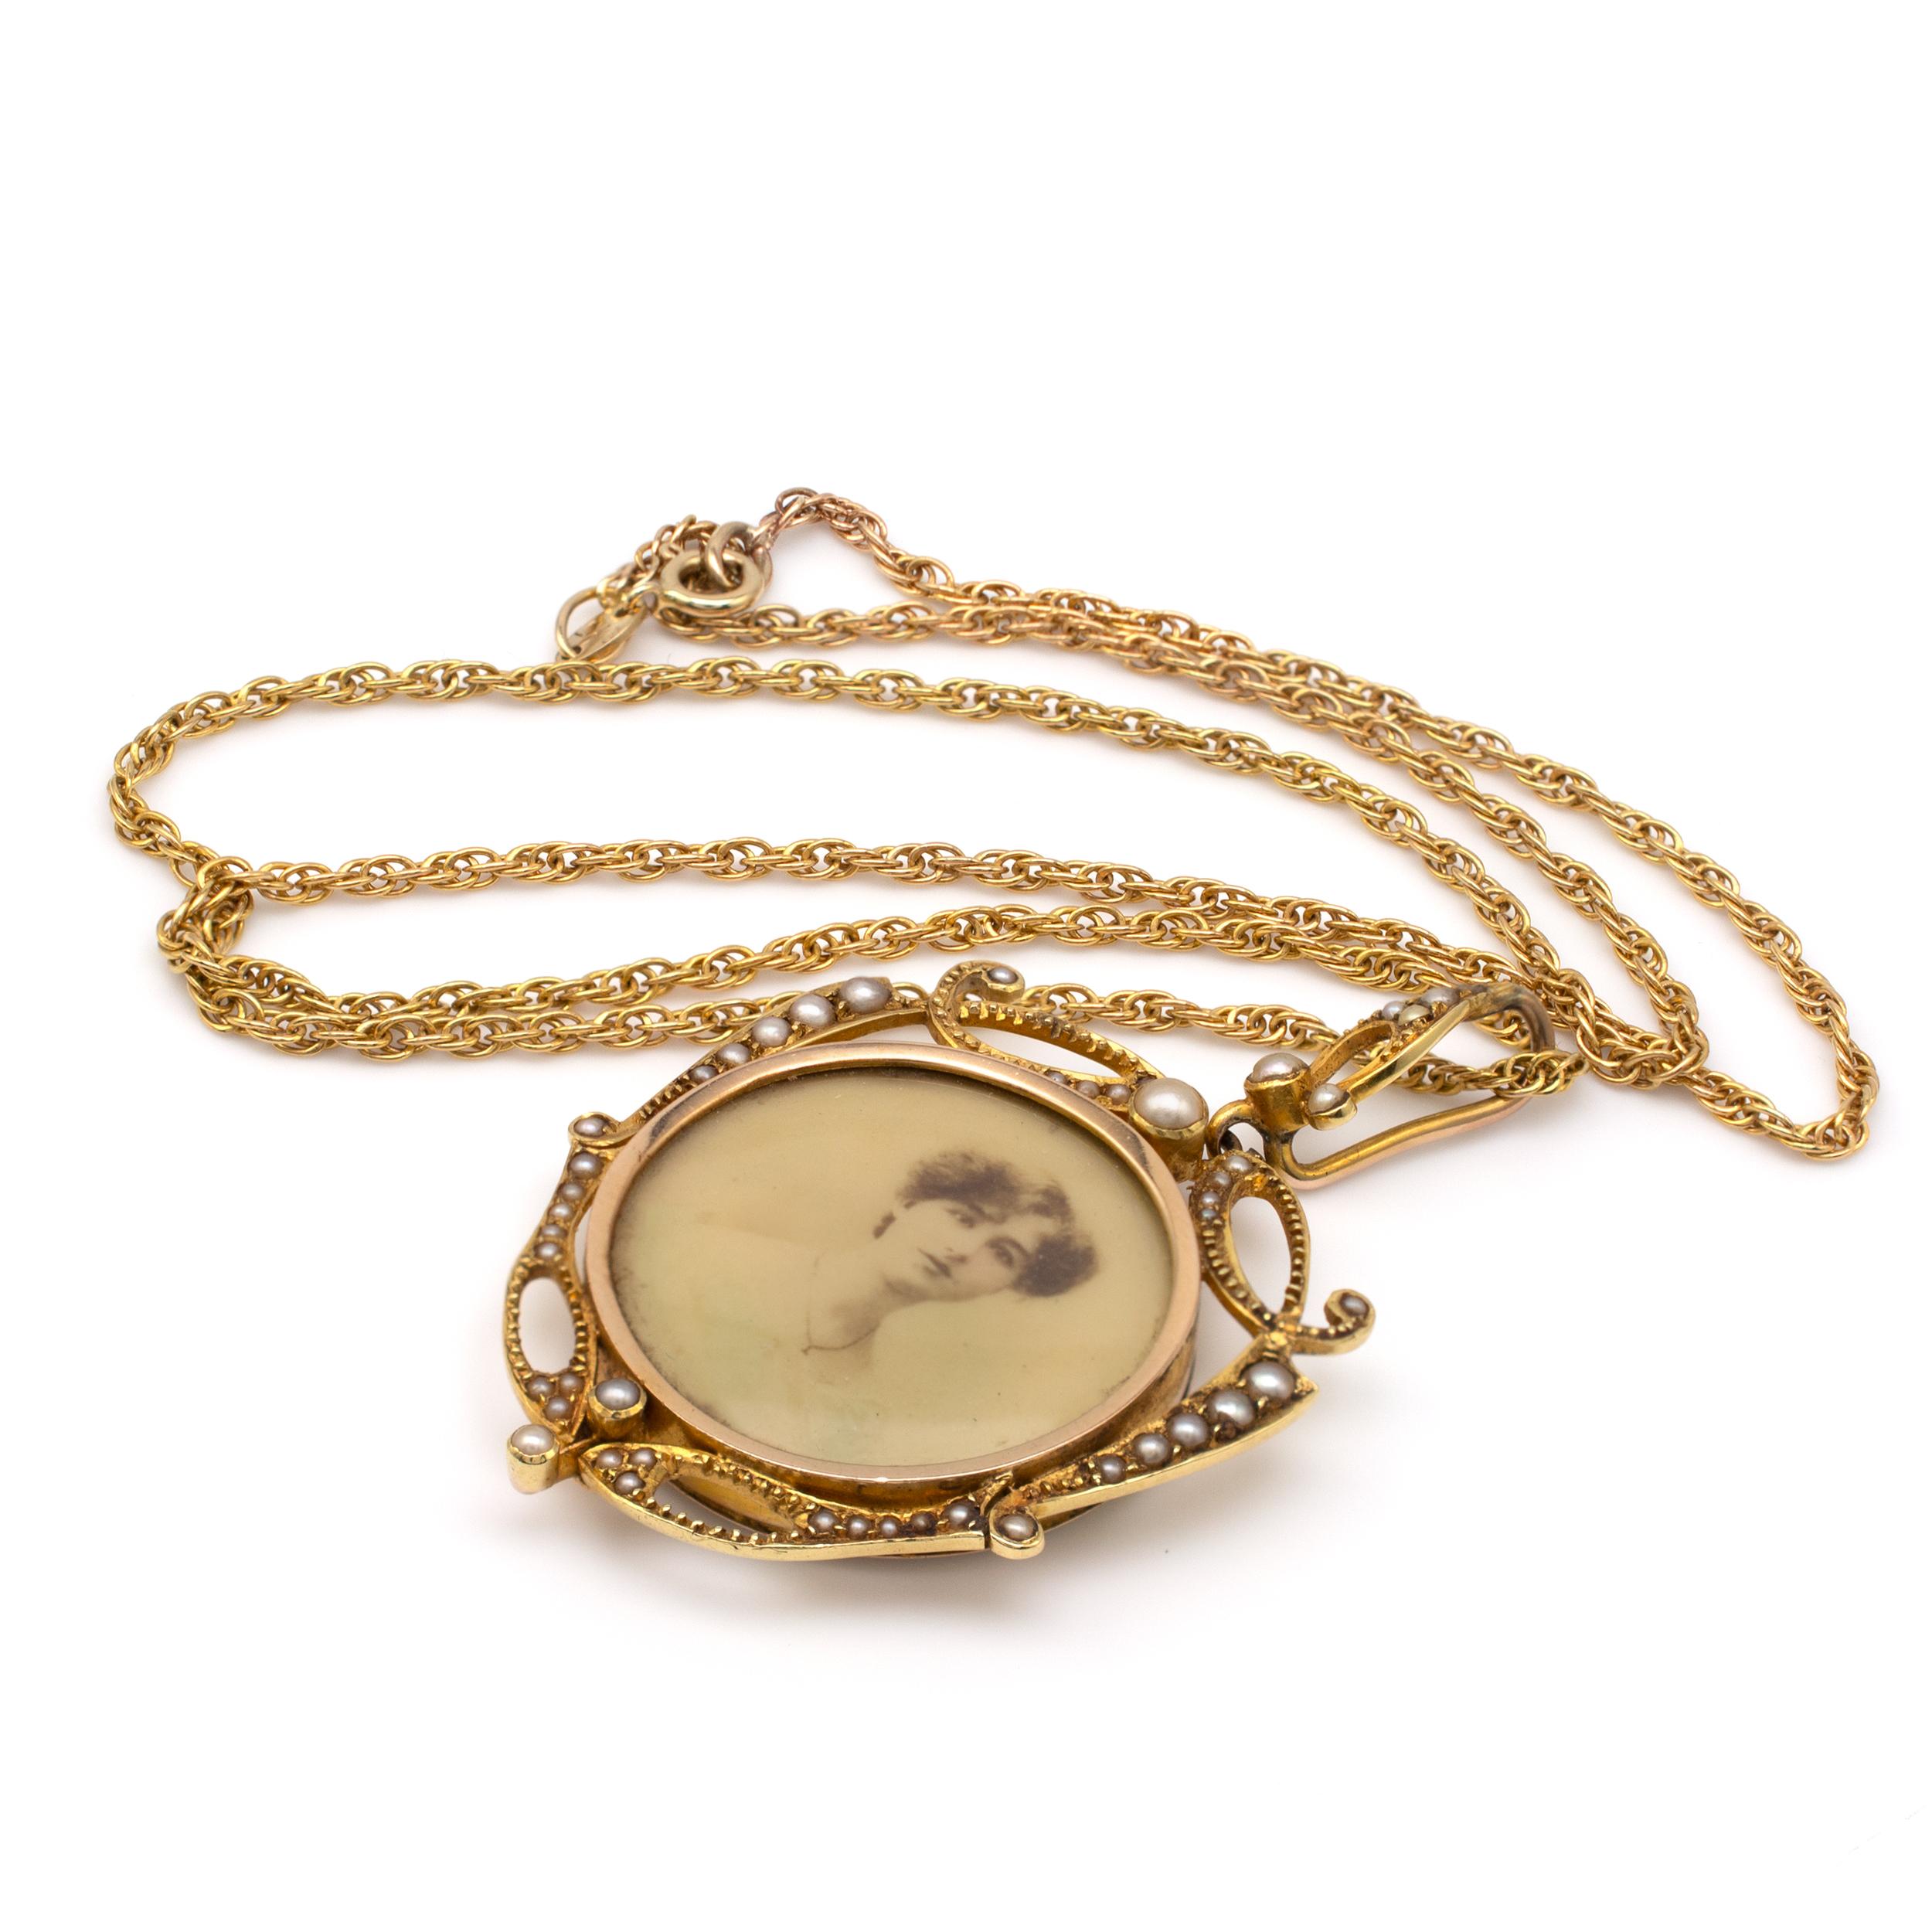 This fine quality Art Nouveau diamond and pearls picture locket pendant is beautifully crafted in 18k gold. 

The antique gold double-sided picture locket is decorated around the side with ornate scrolls set with graduated subtle pearls and